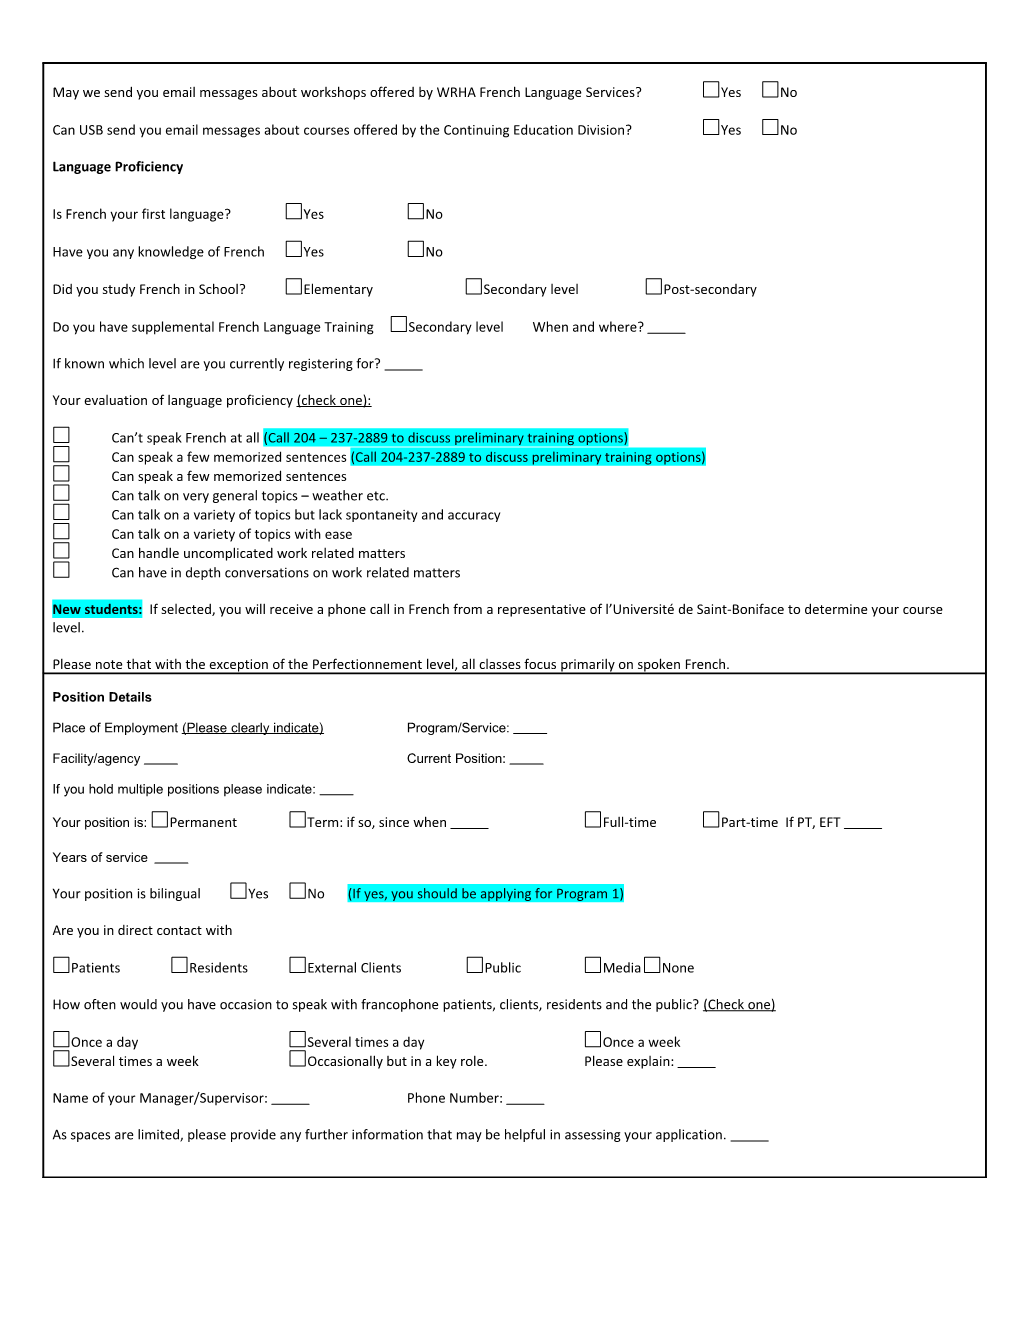 Please Fill out Form and Then Print